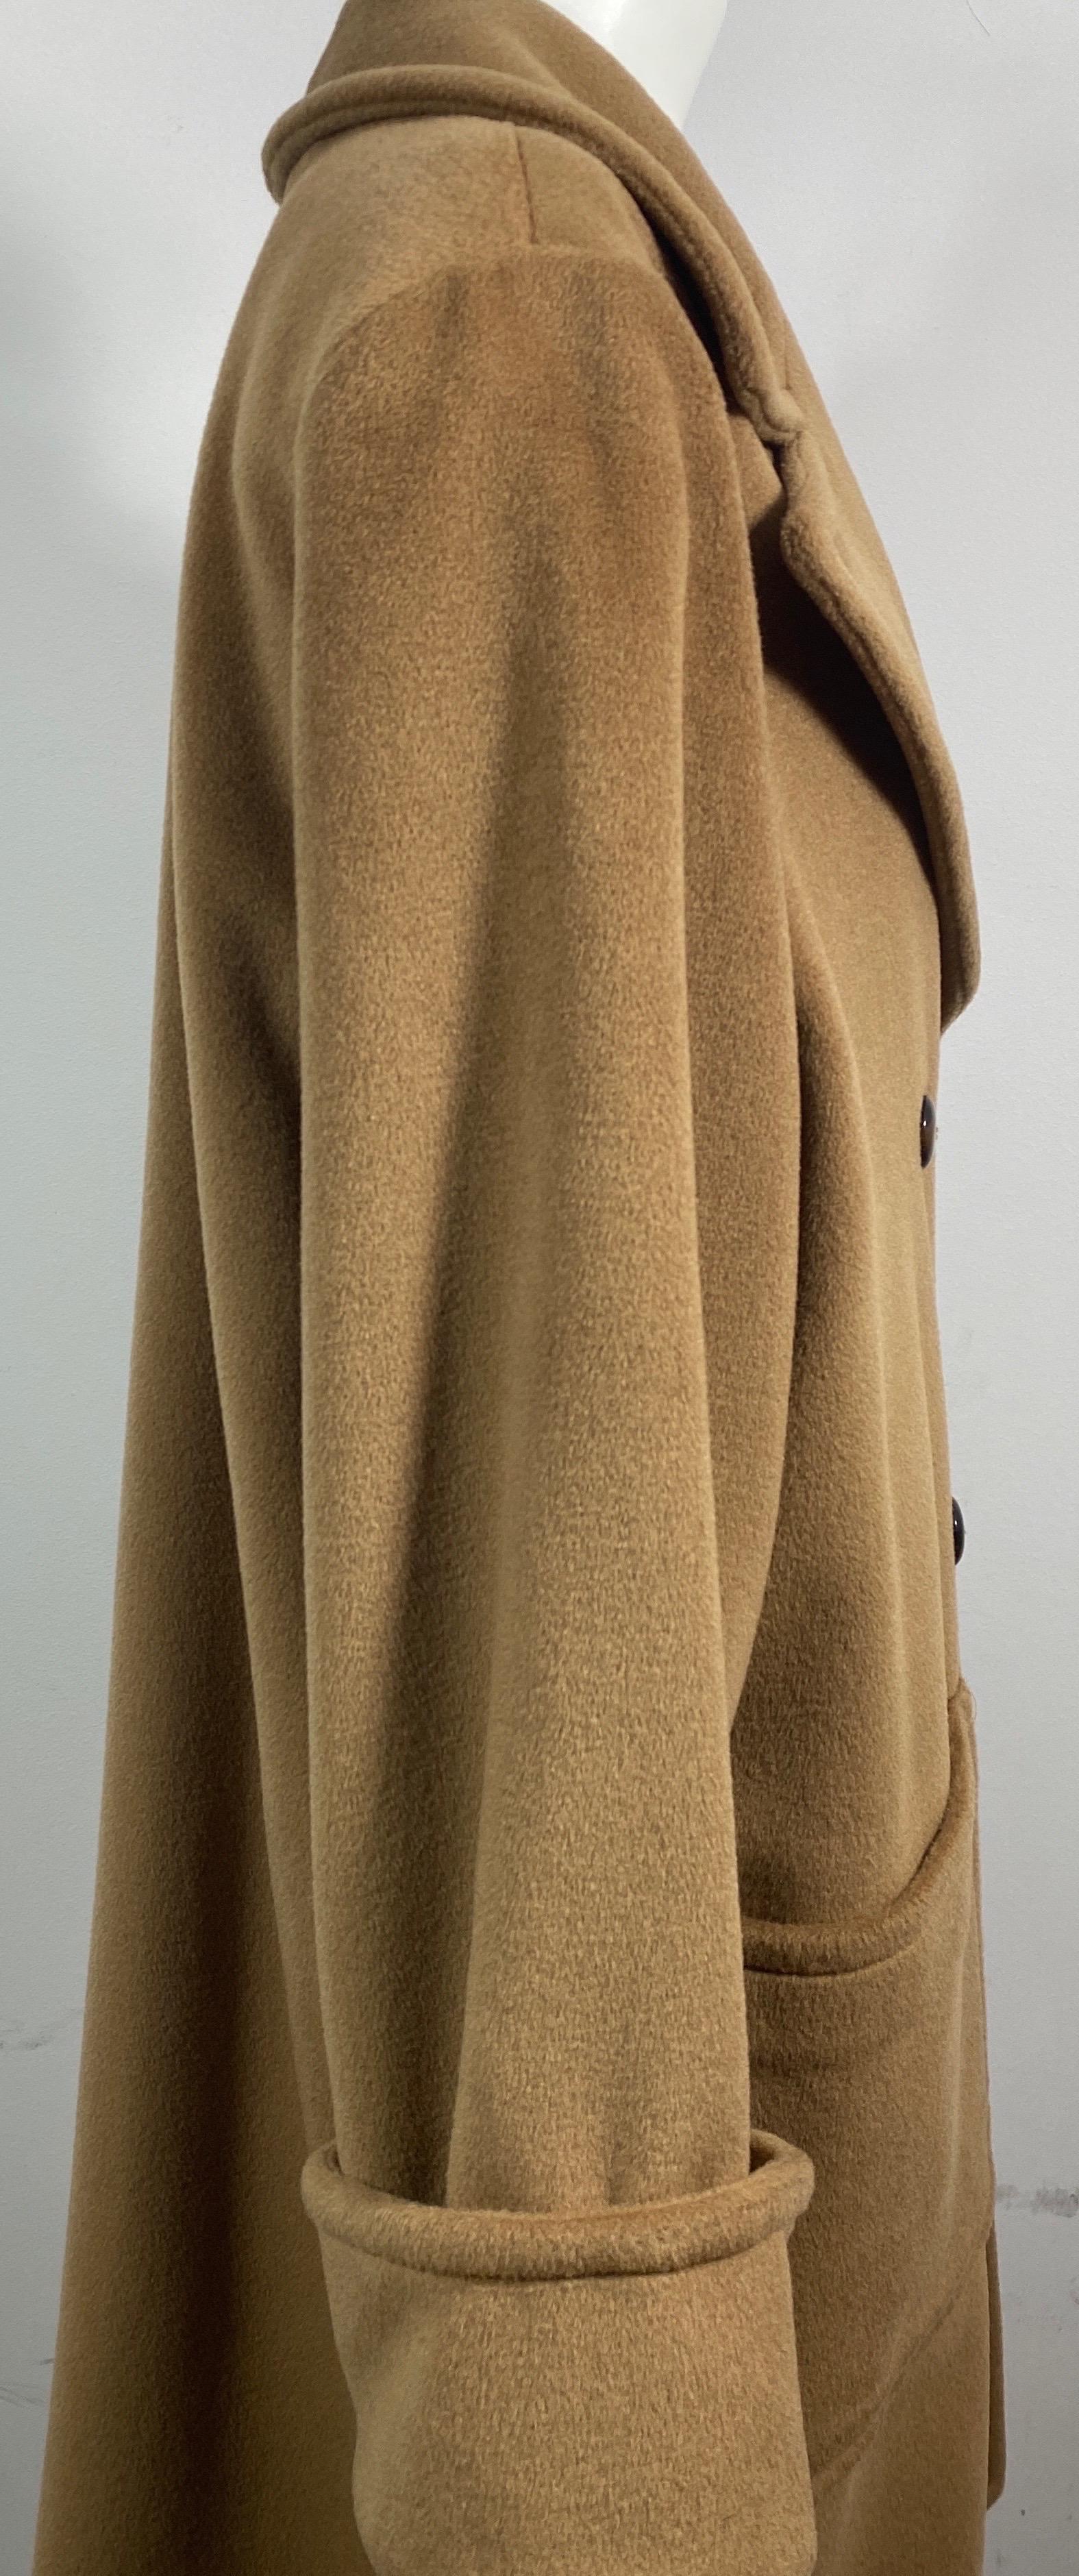 Valentino Boutique 1990’s Double Breasted Tan Cashmere Oversized Coat - Size 10 For Sale 7